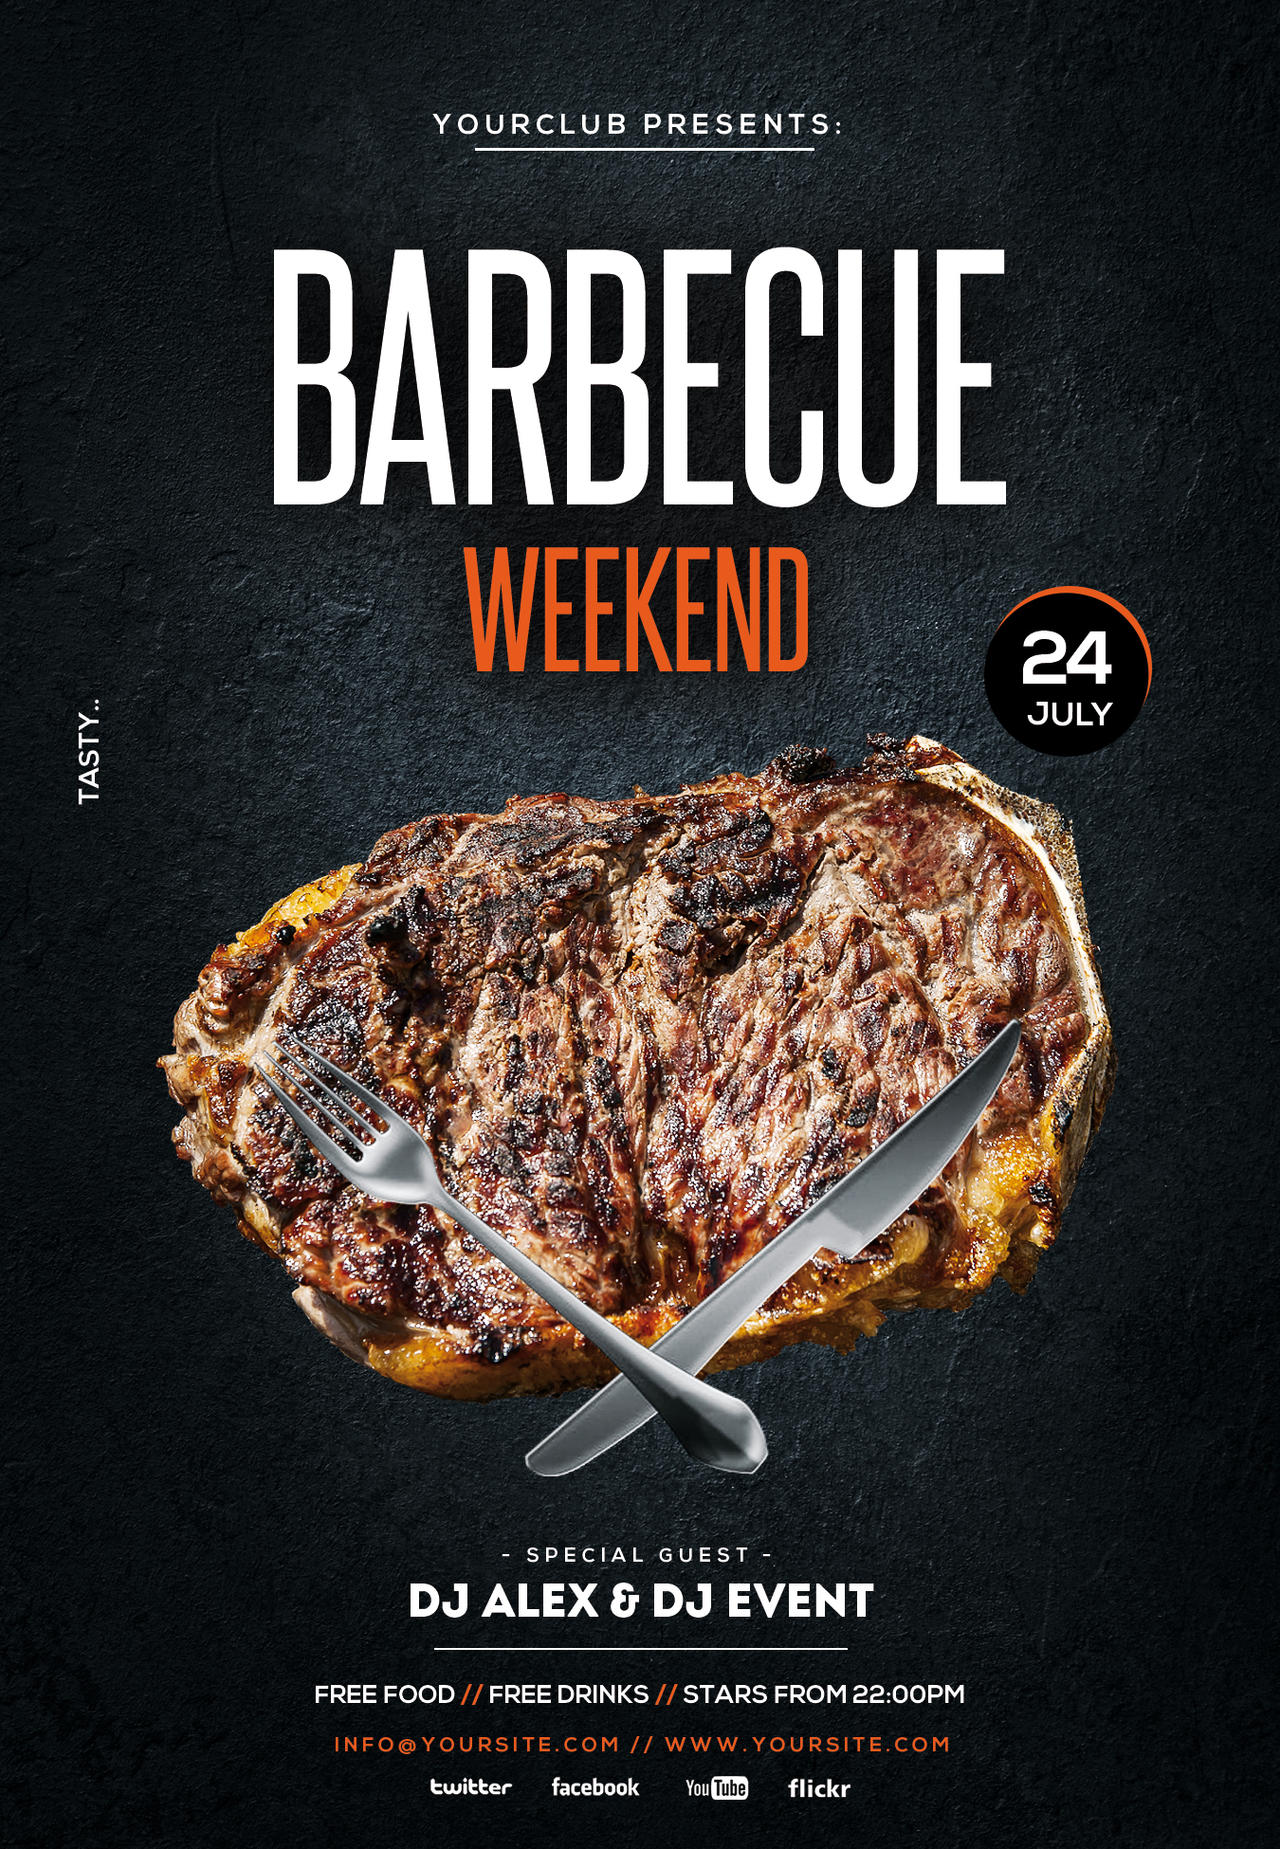 Barbecue Weekend Free BBQ PSD Flyer Template by pixelsdesign-net In Free Bbq Flyer Template